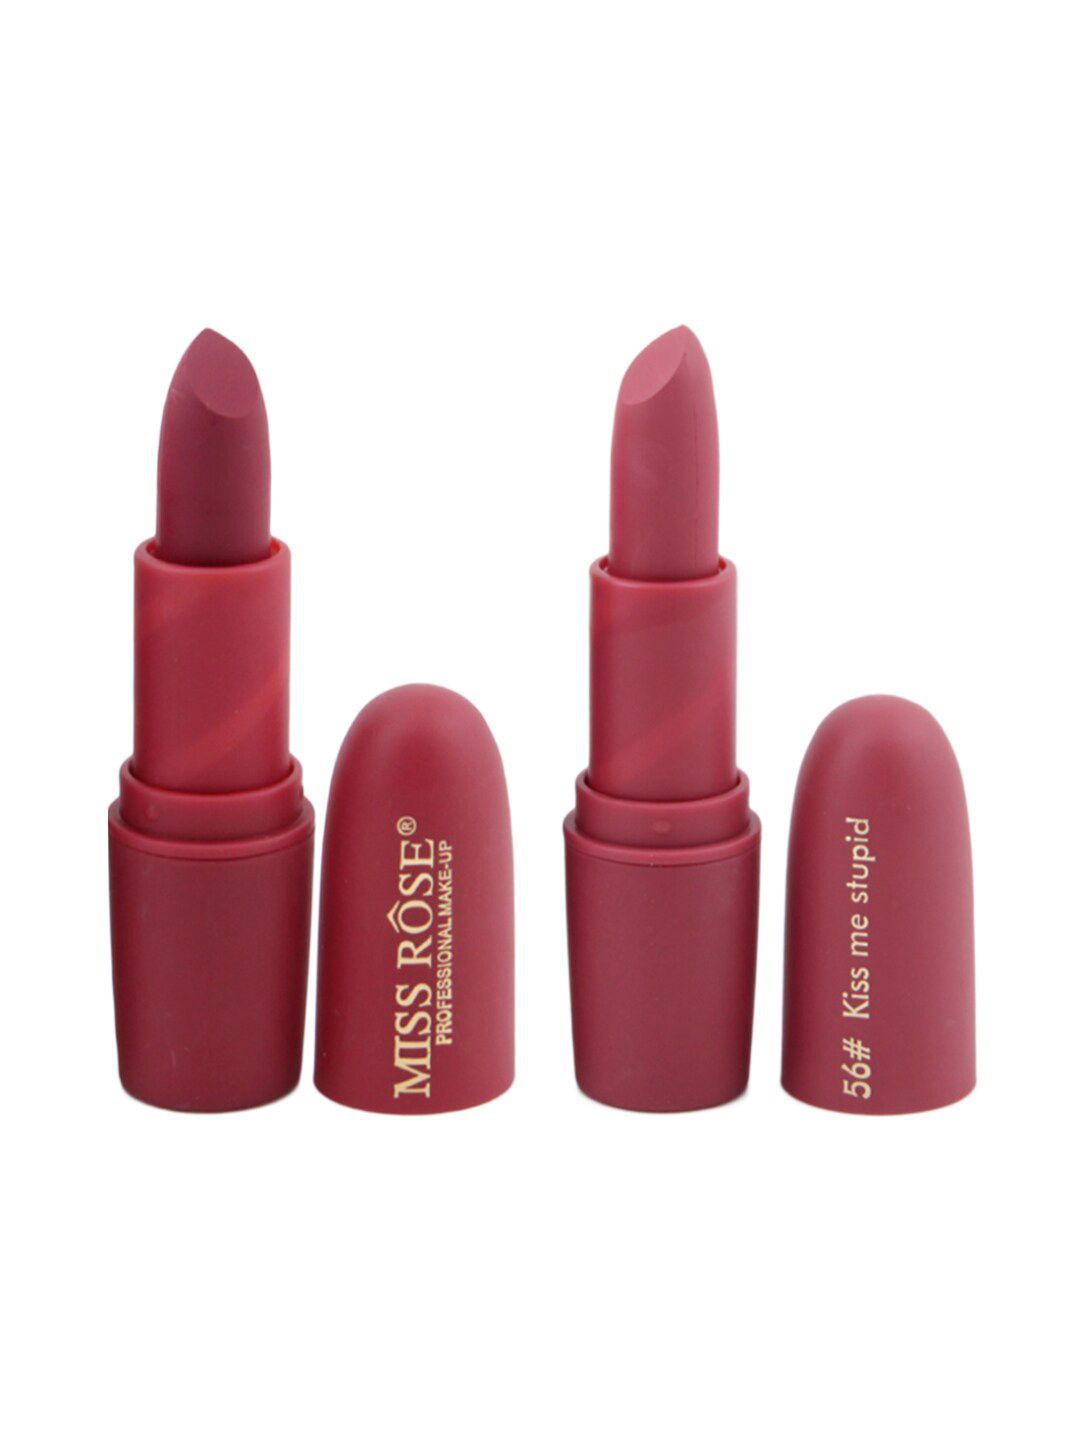 MISS ROSE Professional Make-Up Set of 2 Matte Creamy Lipsticks-Kiss Me Stupid 56 & Chii 49 Price in India